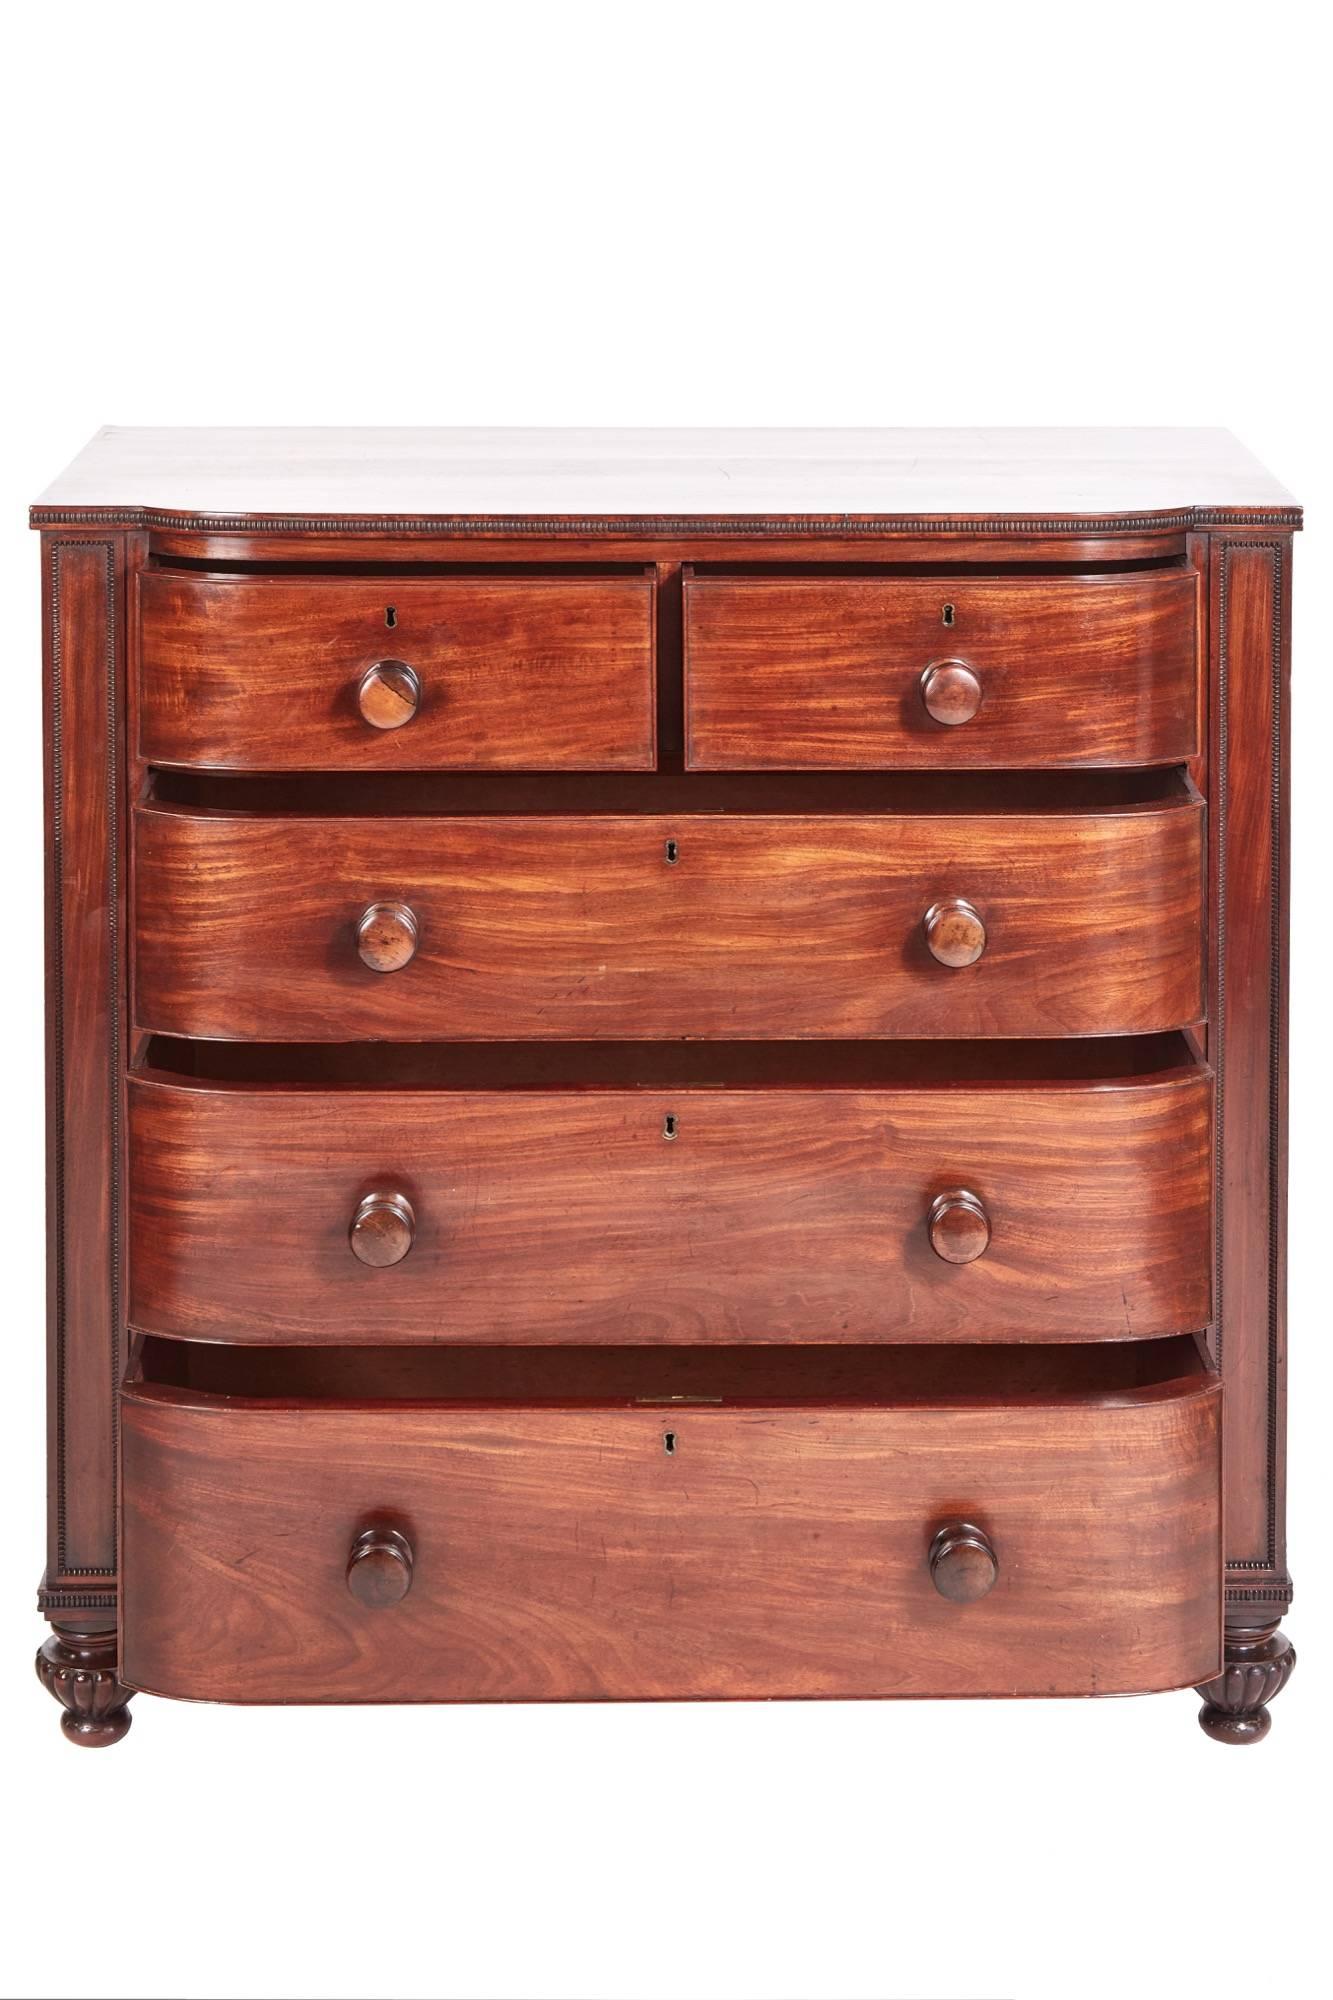 Quality Regency mahogany d shaped front chest of drawers, having a fantastic mahogany top, two short and three long drawers with original turned mahogany knobs, standing on shaped reeded turned feet.
Fantastic color and condition.
Measures: 43